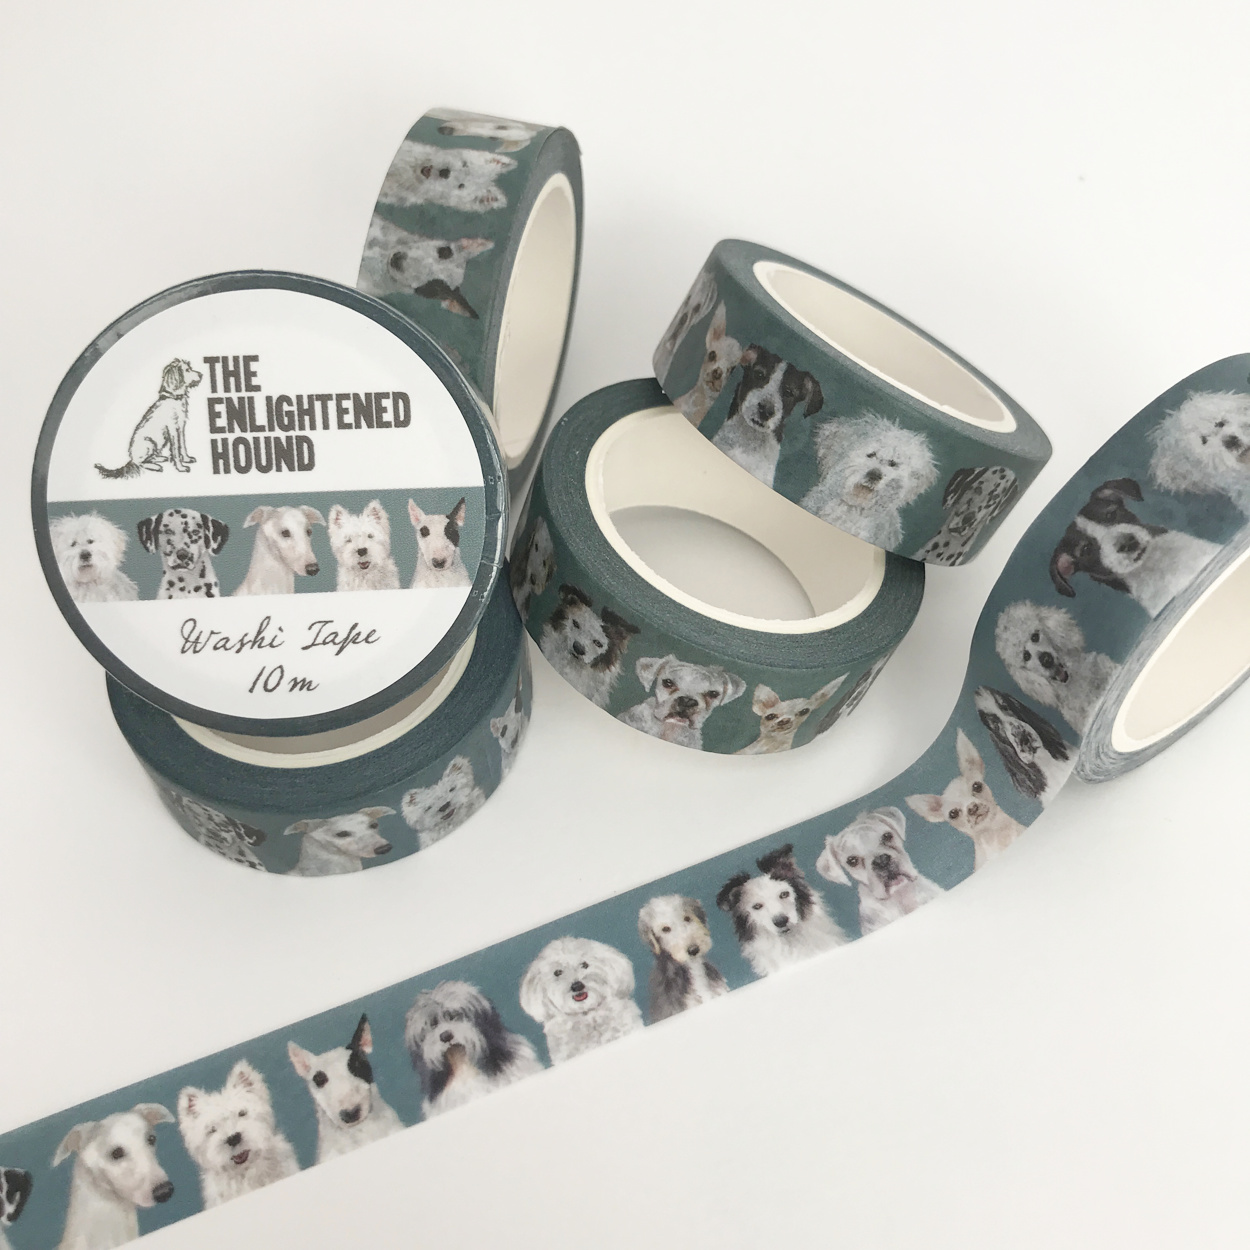 Black and White Dogs Washi Tape | The Enlightened Hound